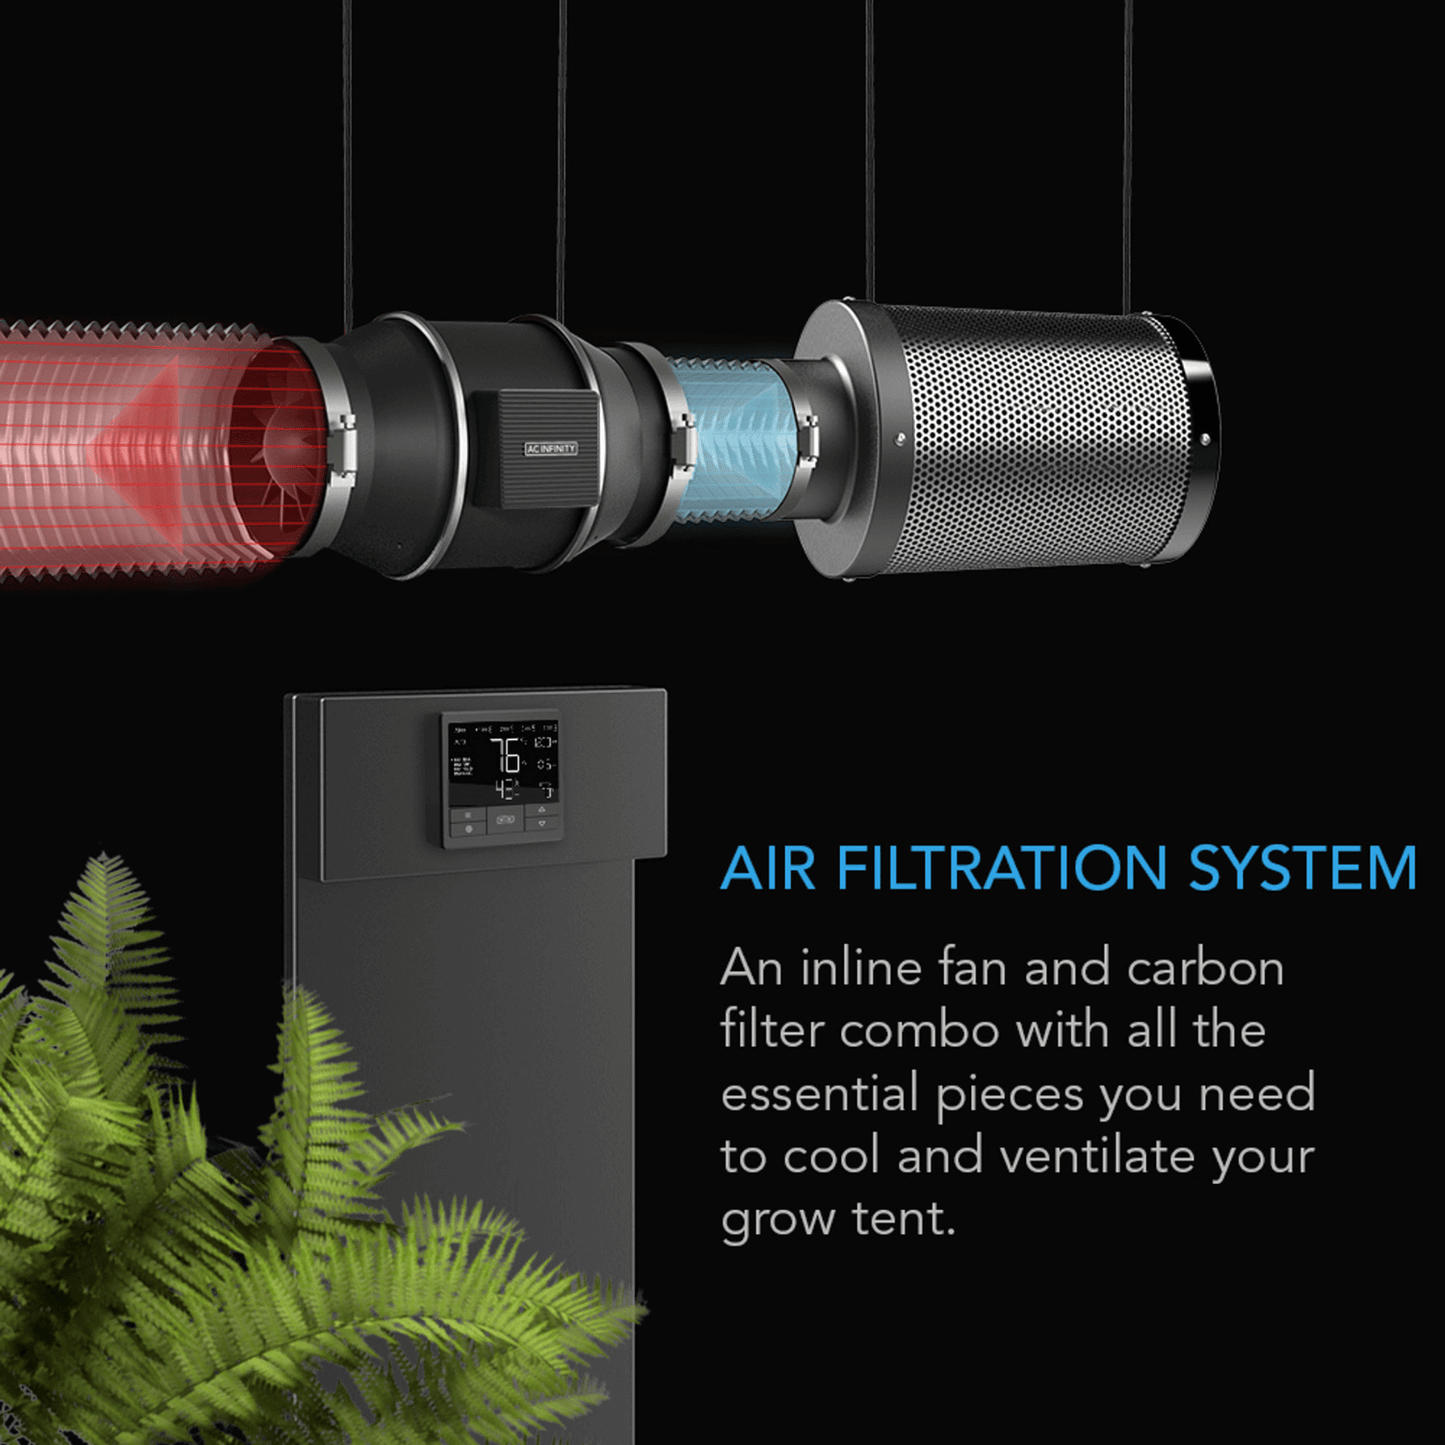 AC Infinity Air Filtration Kit PRO 6", Inline Fan with Smart Controller, Carbon Filter & Ducting Combo | AC-FKT6 | Grow Tents Depot | Climate Control | 819137022928